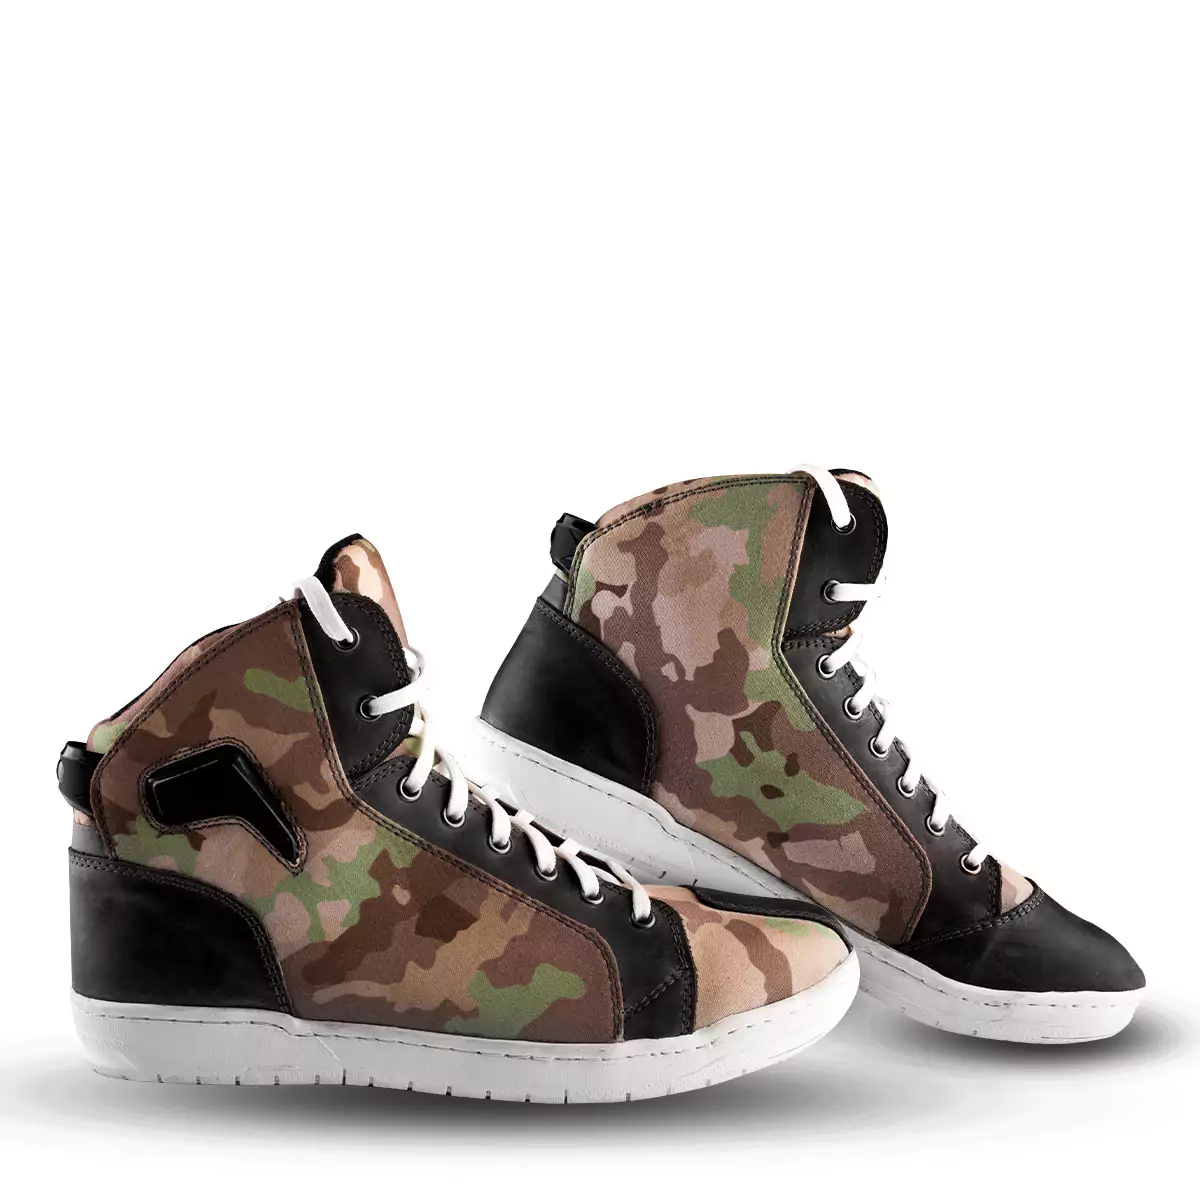 motorcycle sneaker shoe pair with army uniform print having white laces and boundary